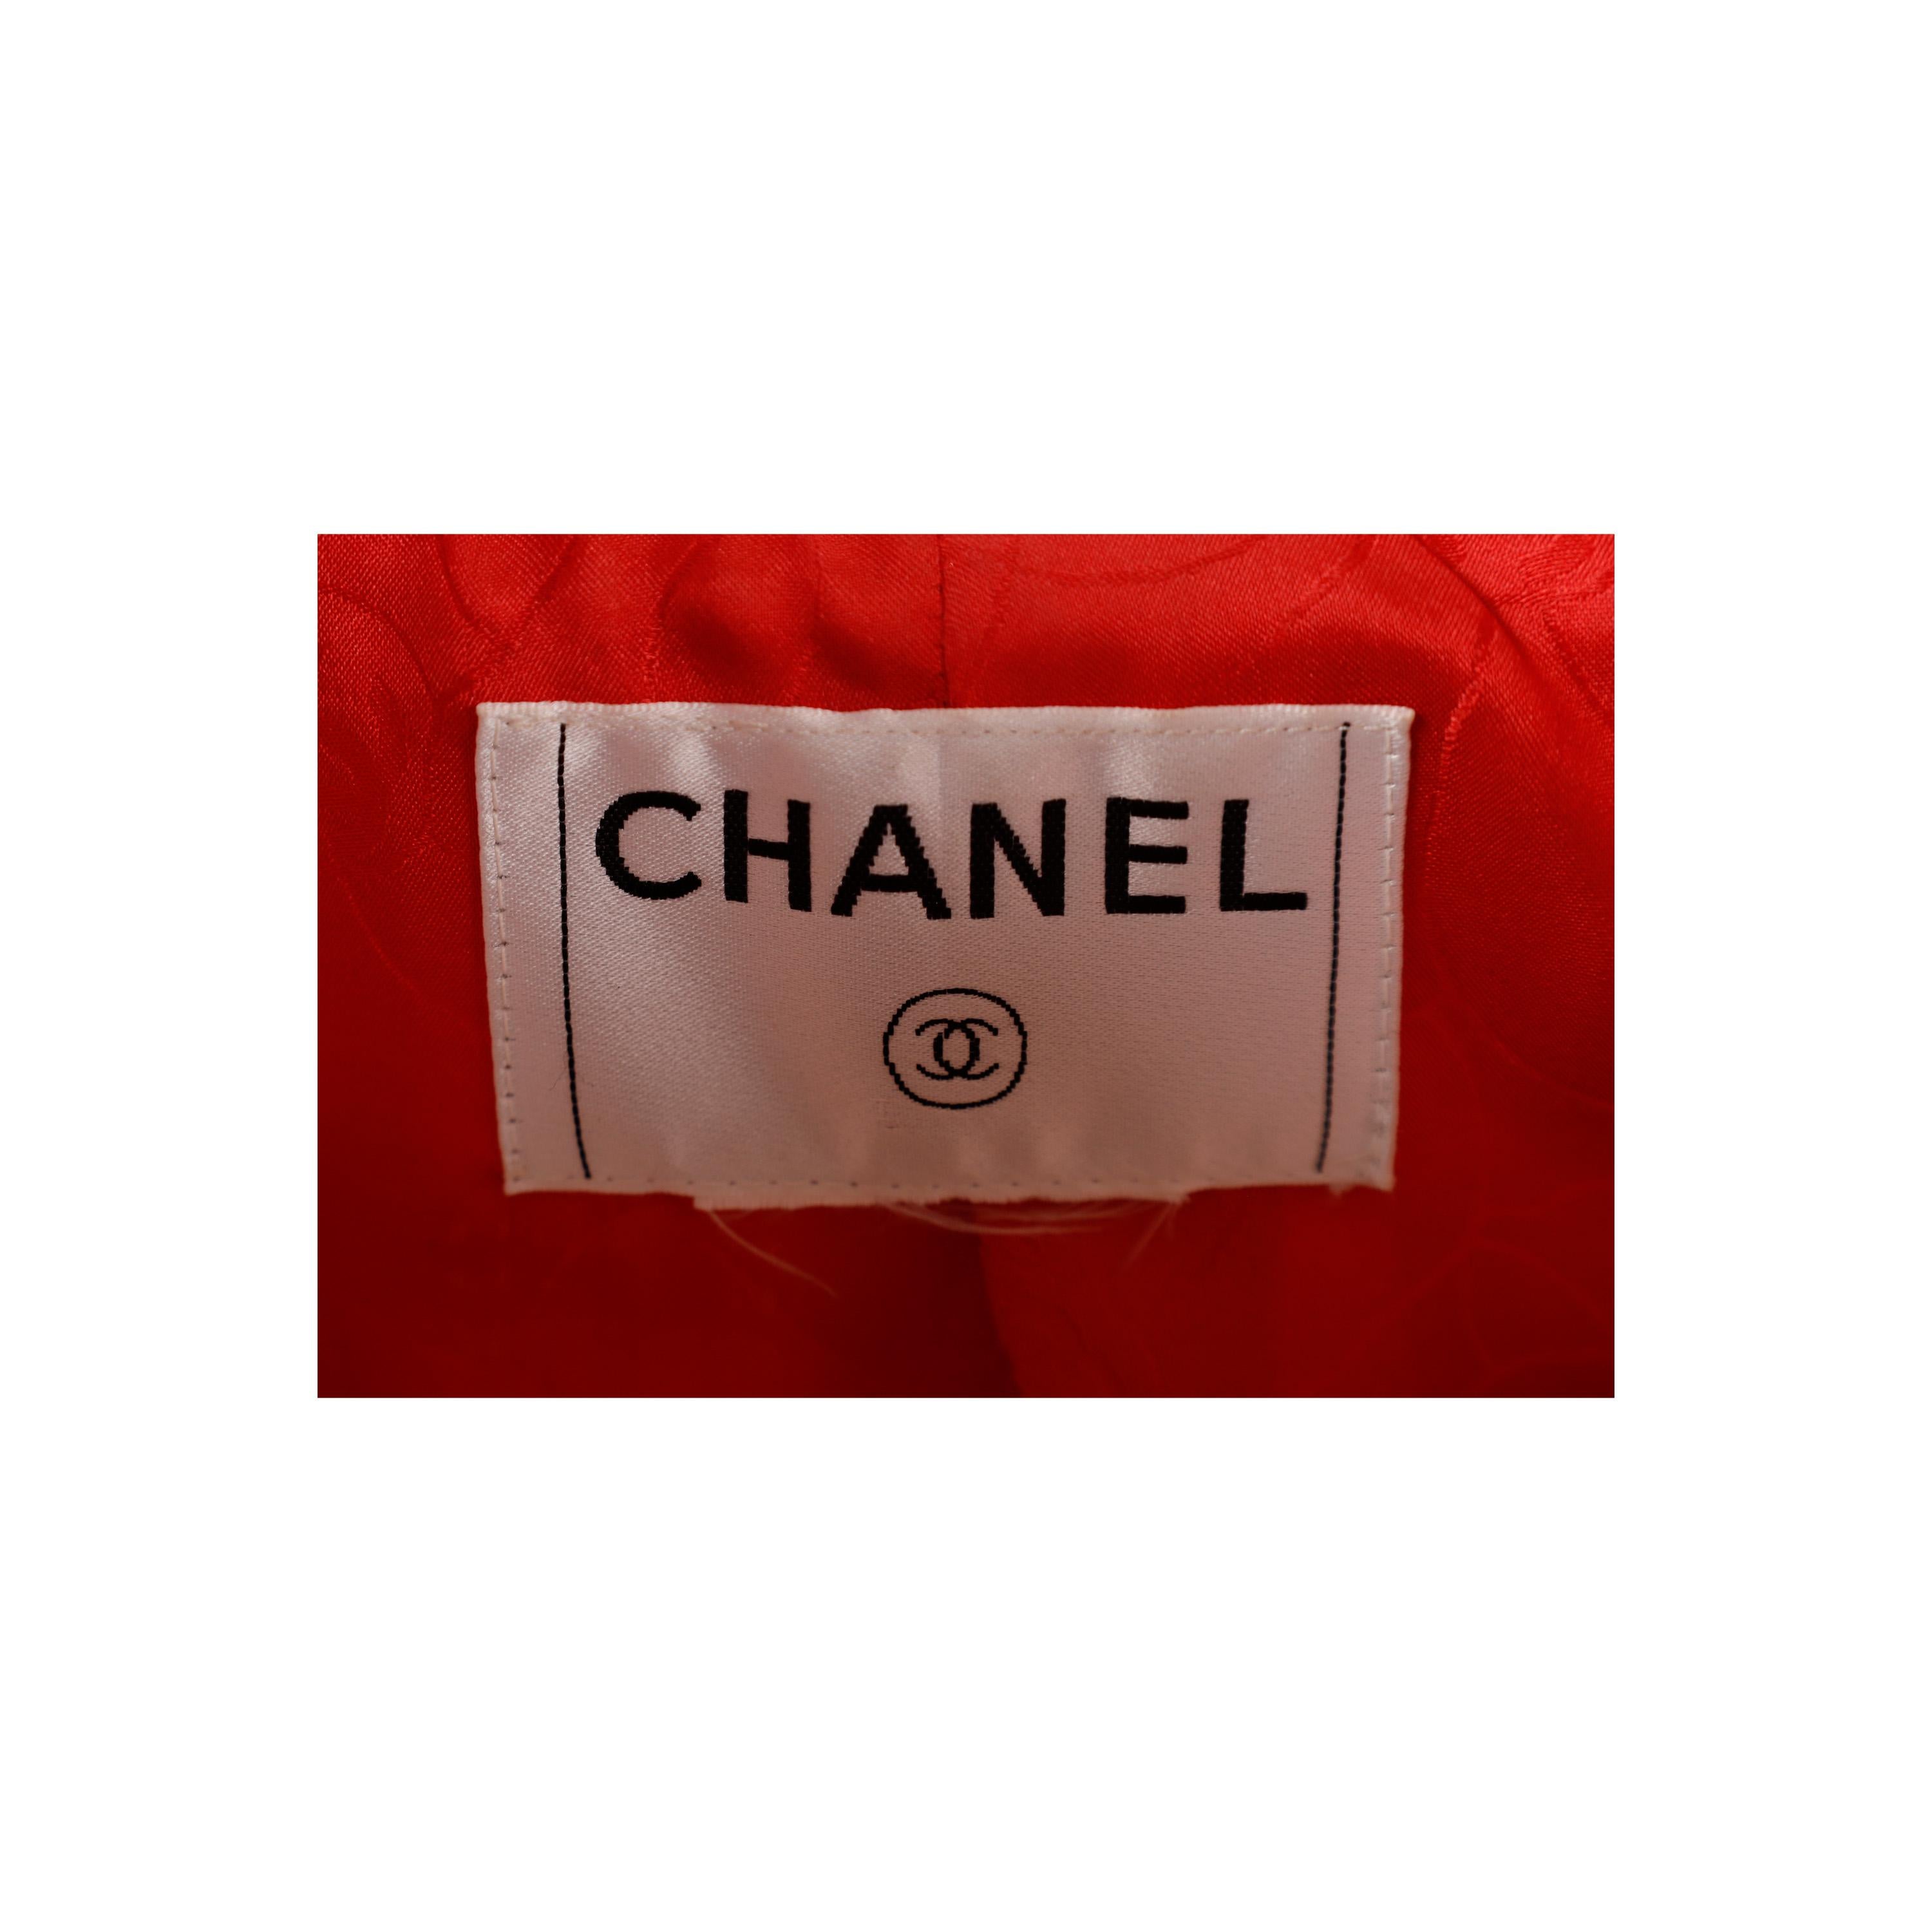 Chanel Tweed Jacket  In Excellent Condition For Sale In Milano, IT